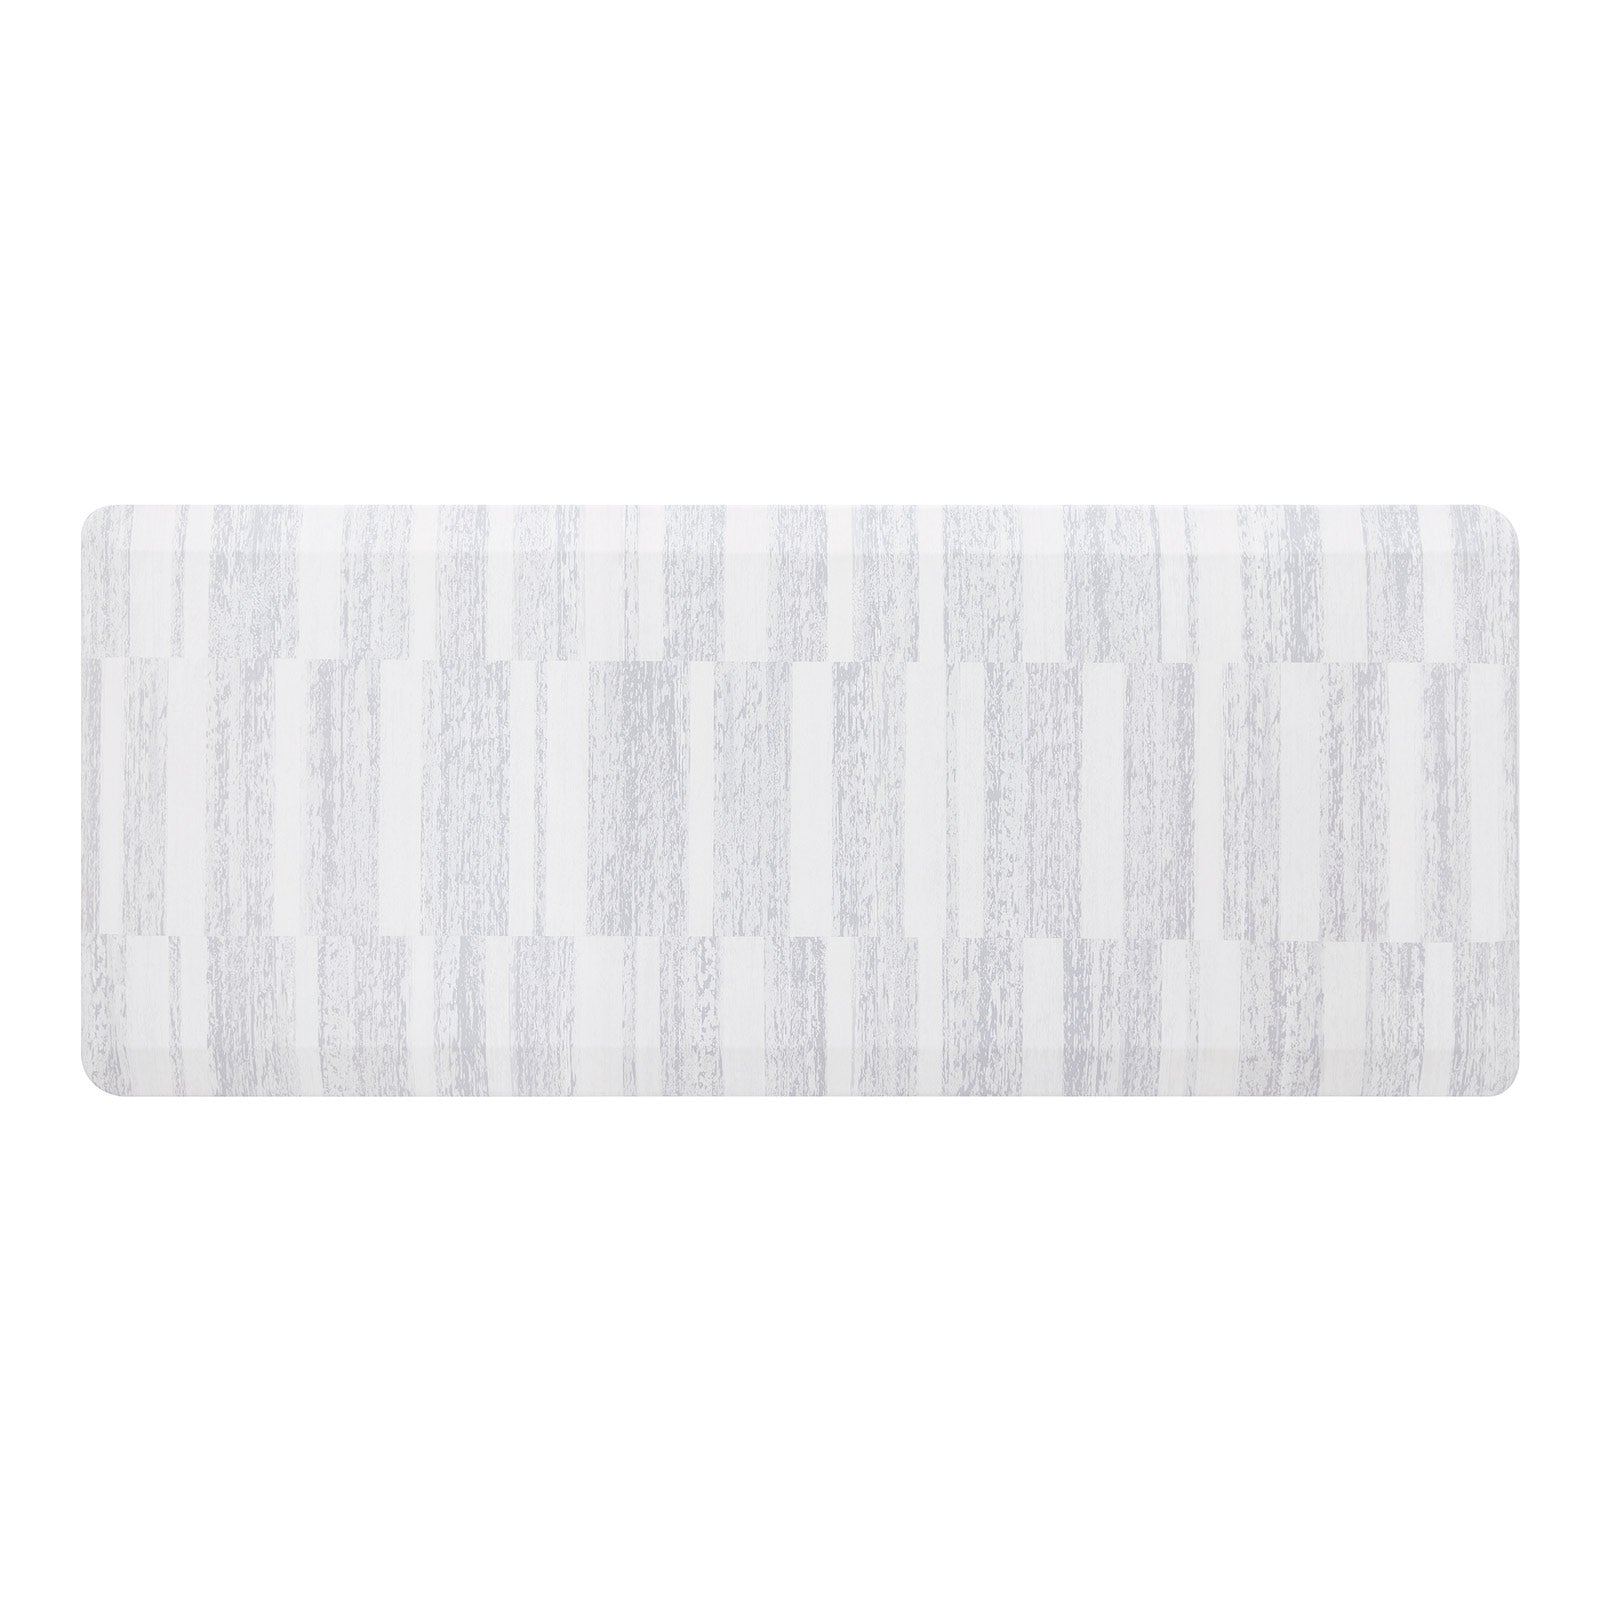 Overhead image of sutton stripe heather gray and white inverted stripe standing mat shown in size 22x54